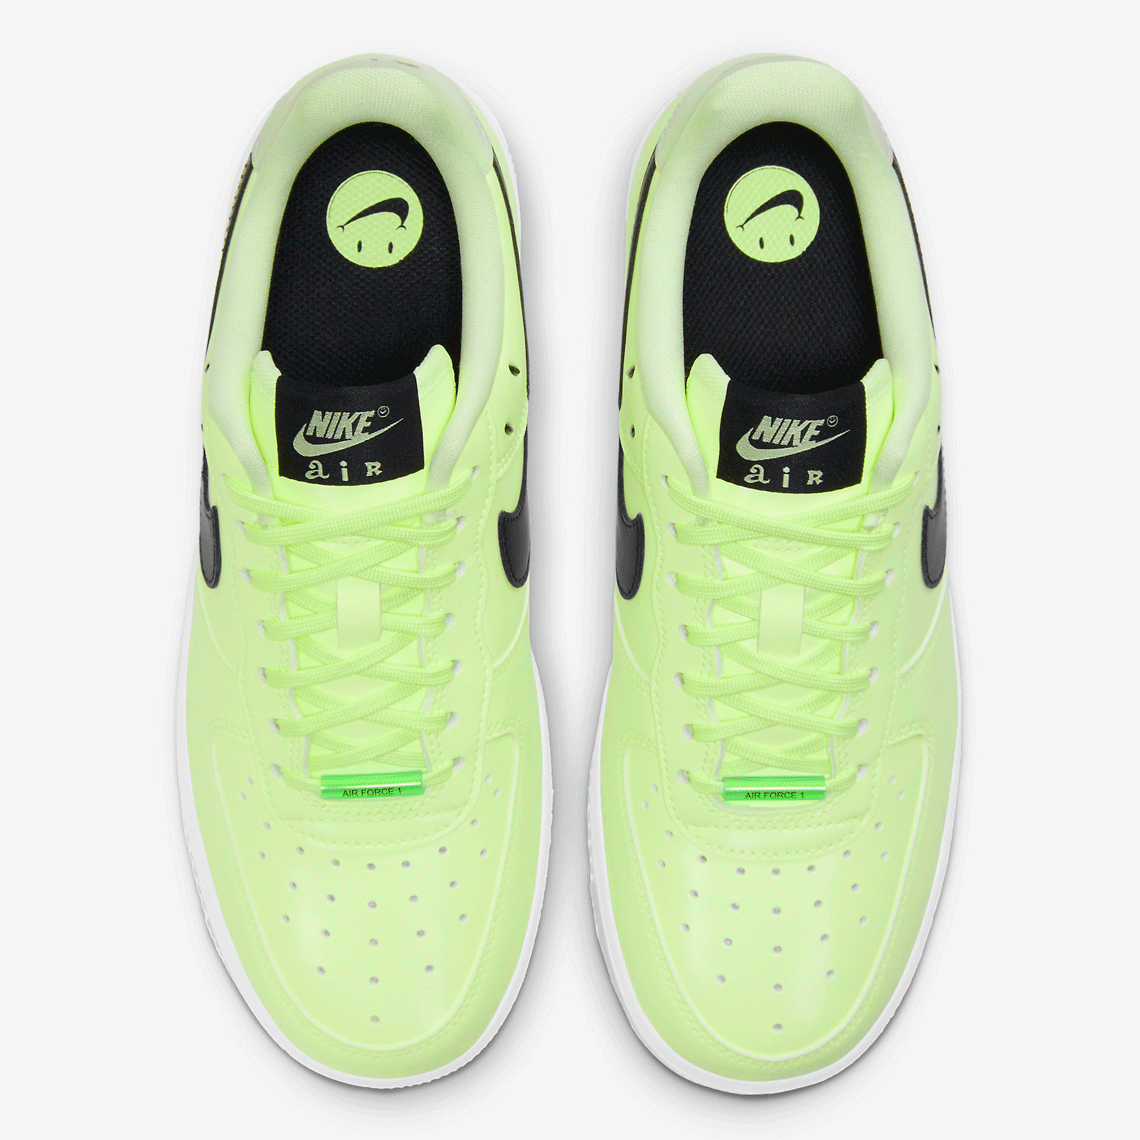 Buy > air force 1 fluorescente > in stock